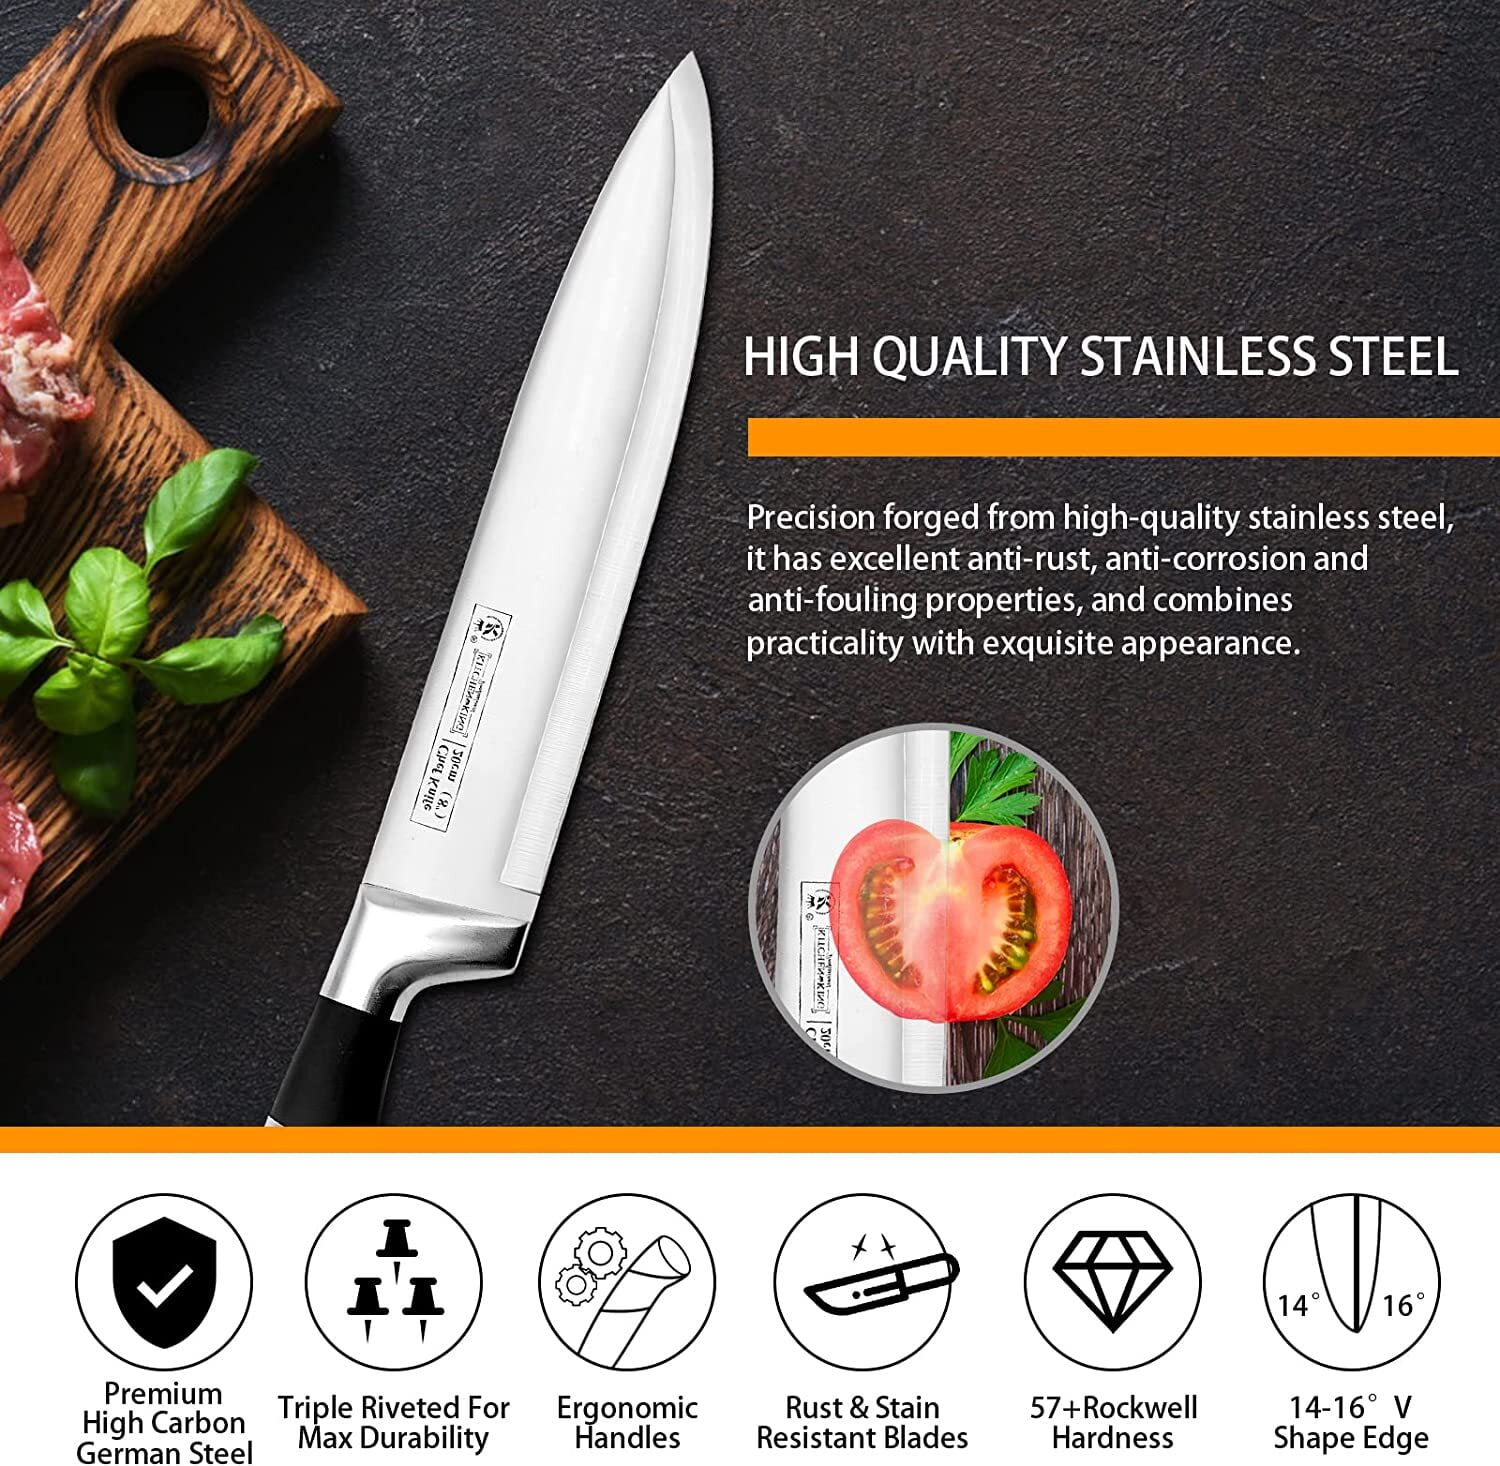 11 pcs Colorful Knife Set,Sharp Kitchen Knives Sets for Slicing Paring and  Cooking, Professional Cute Pink Chefs Knife Set fit to Bbq RV